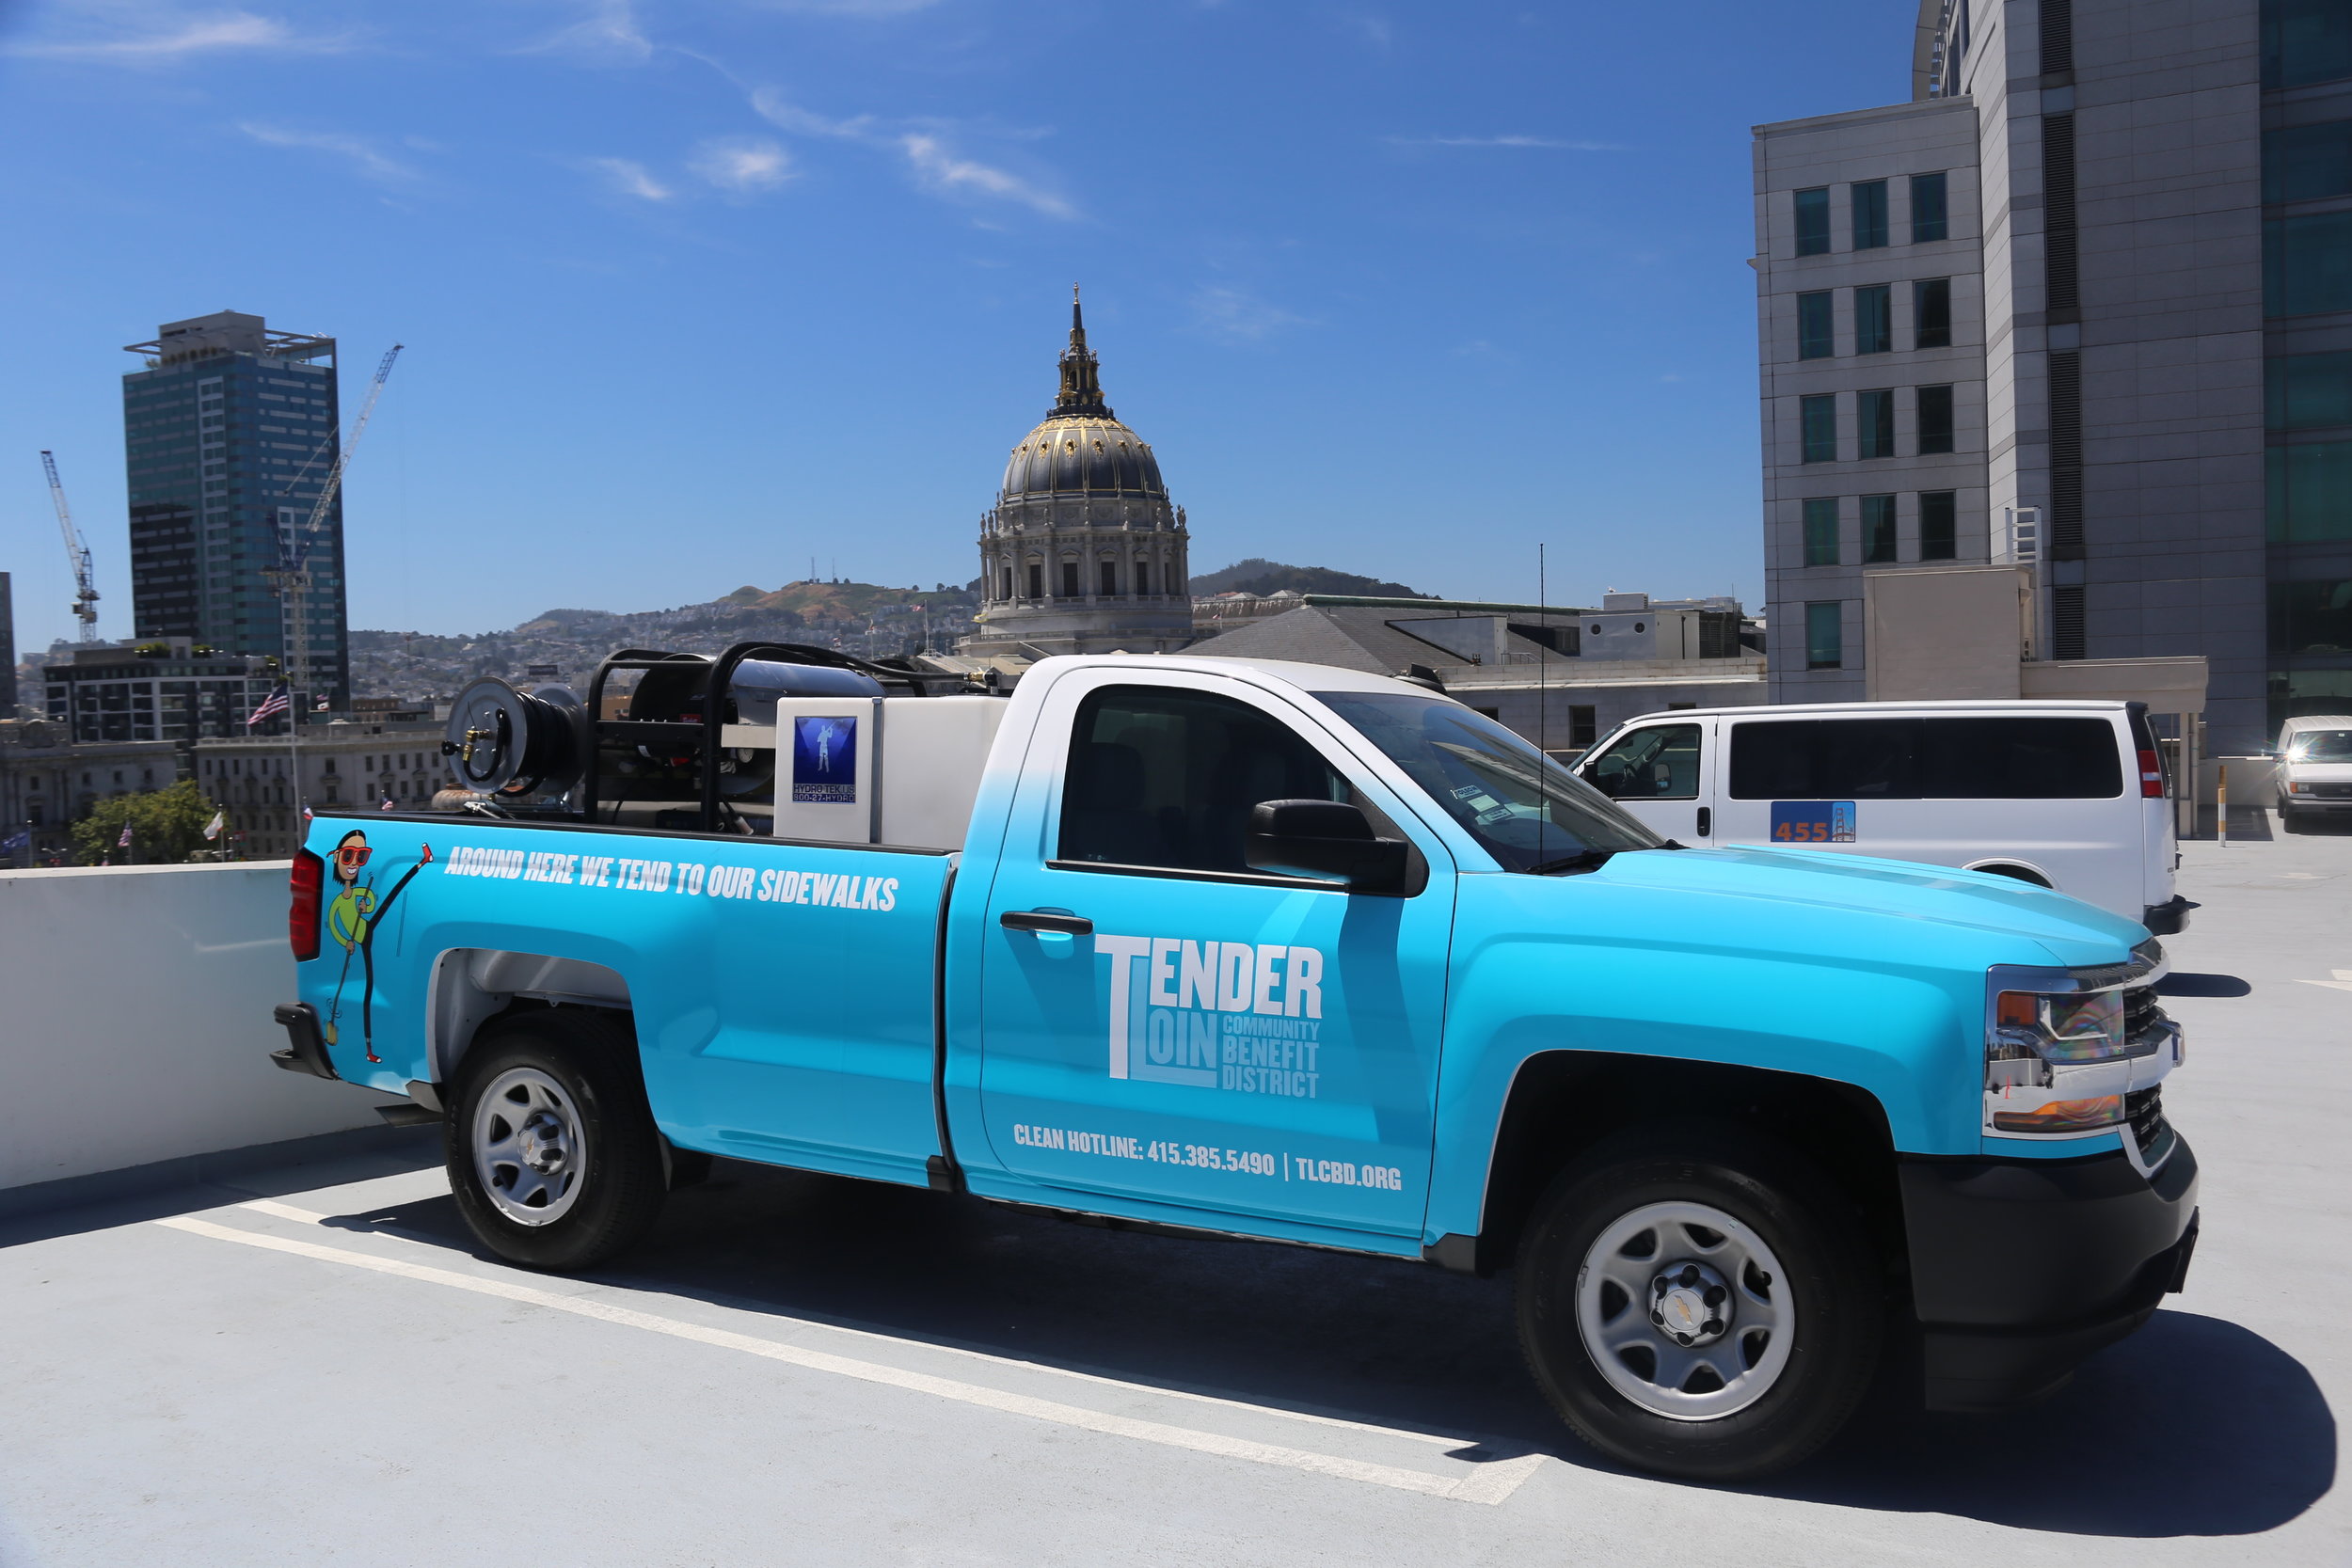 Have you seen these trucks out and about? Say hello to our Clean Team members!